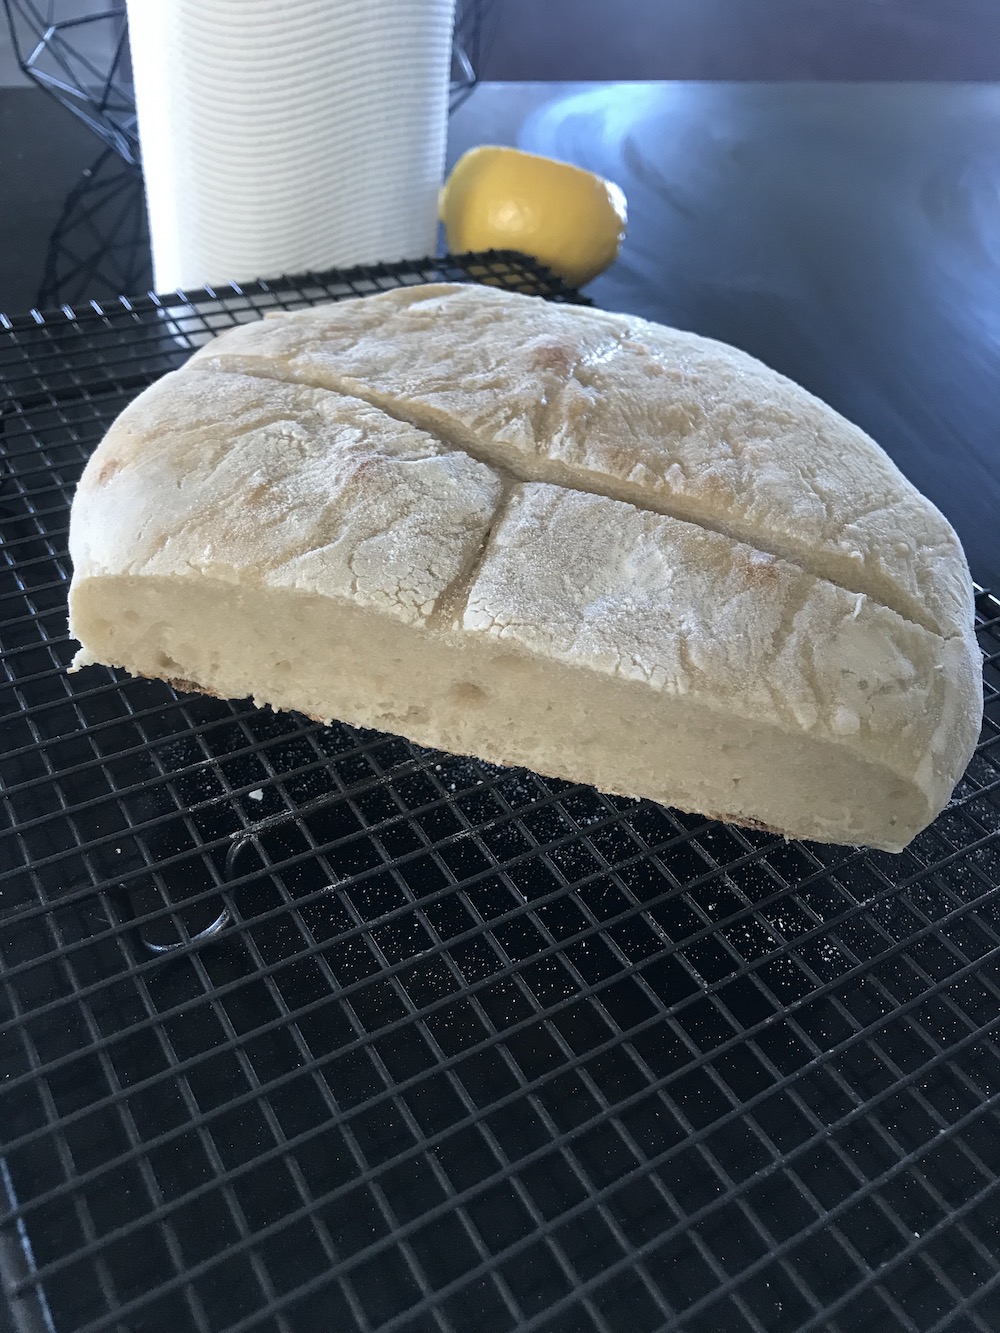 a flat pale loaf of bread, with a cut side facing away